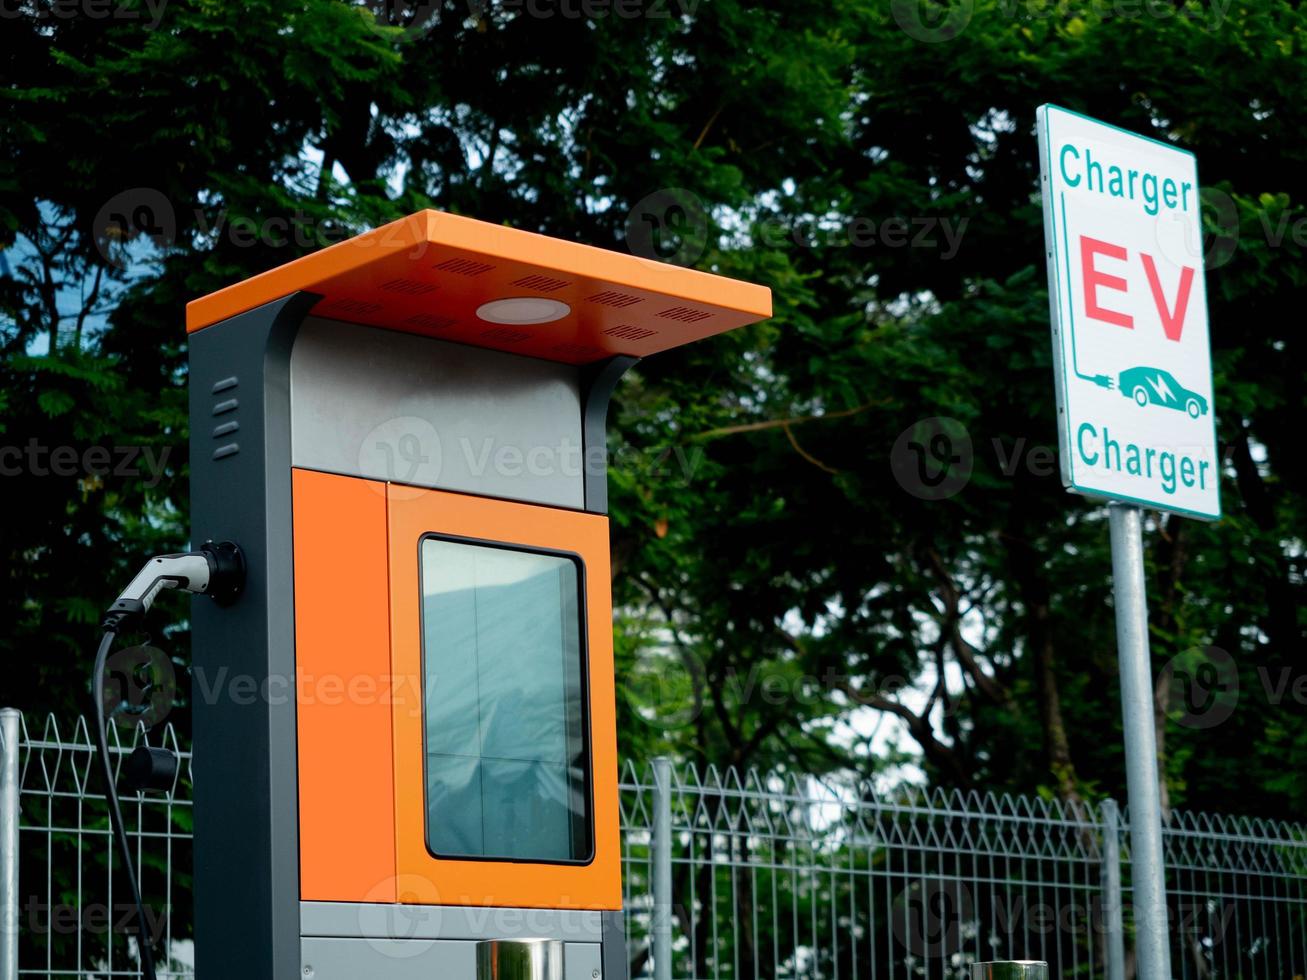 Ev station park charger car motor battery automotive blue green energy power solar fuel innovation technology hybrid ecology electric environment fuel renewable industry city concept photo